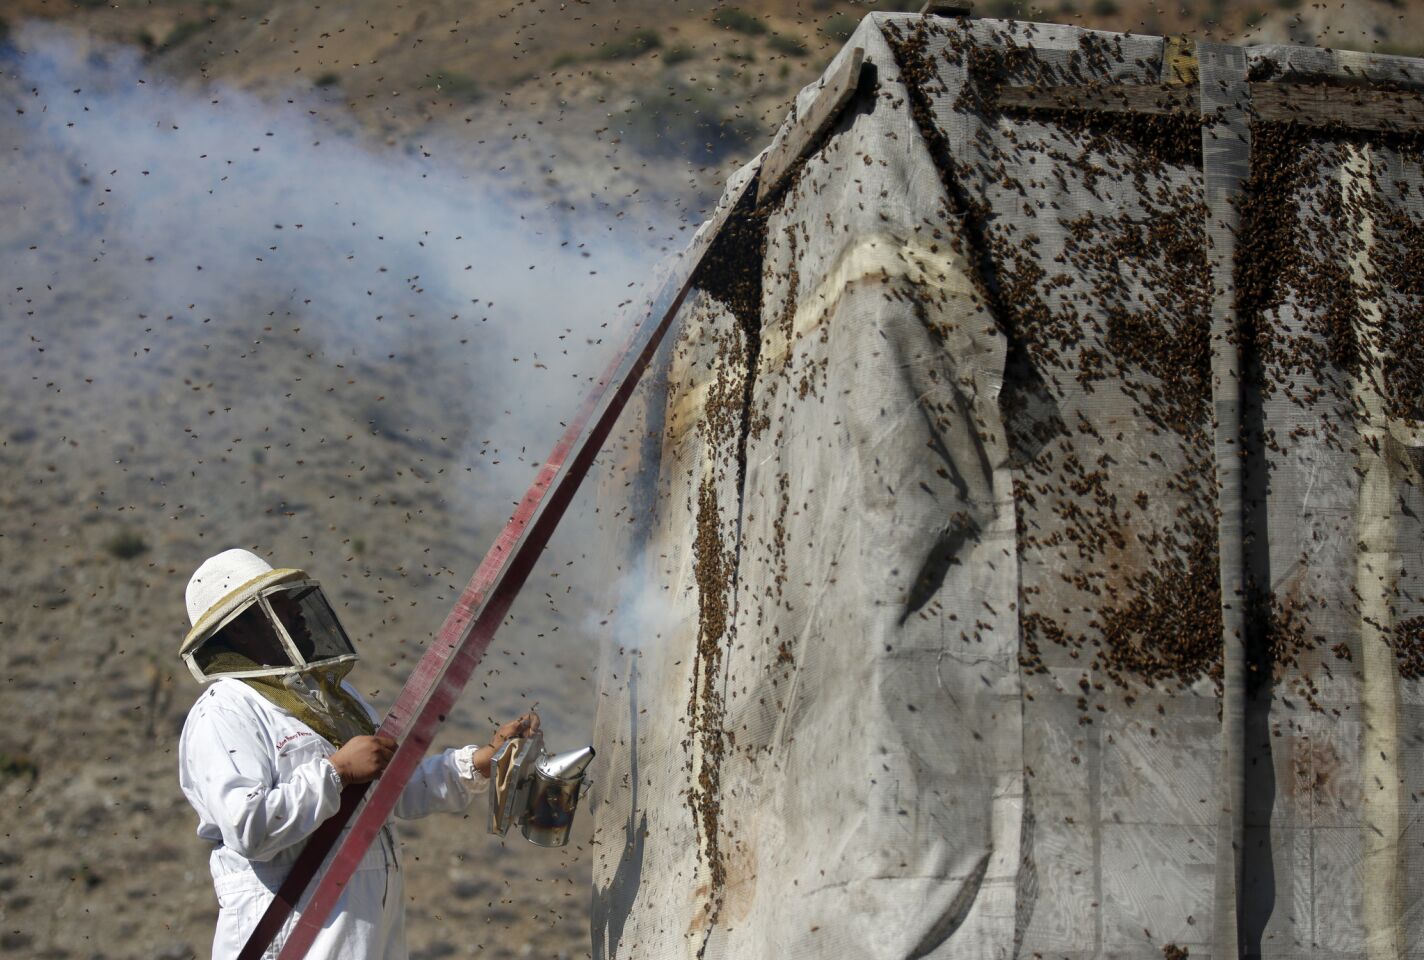 Beekeepers use smoke and water to calm a load of live bees on an 18-wheeler that got stuck in a mudslide east of Tehachapi. Crews continue to unearth vehicles trapped in up to 20 feet of mud after torrential rains pummeled the area.